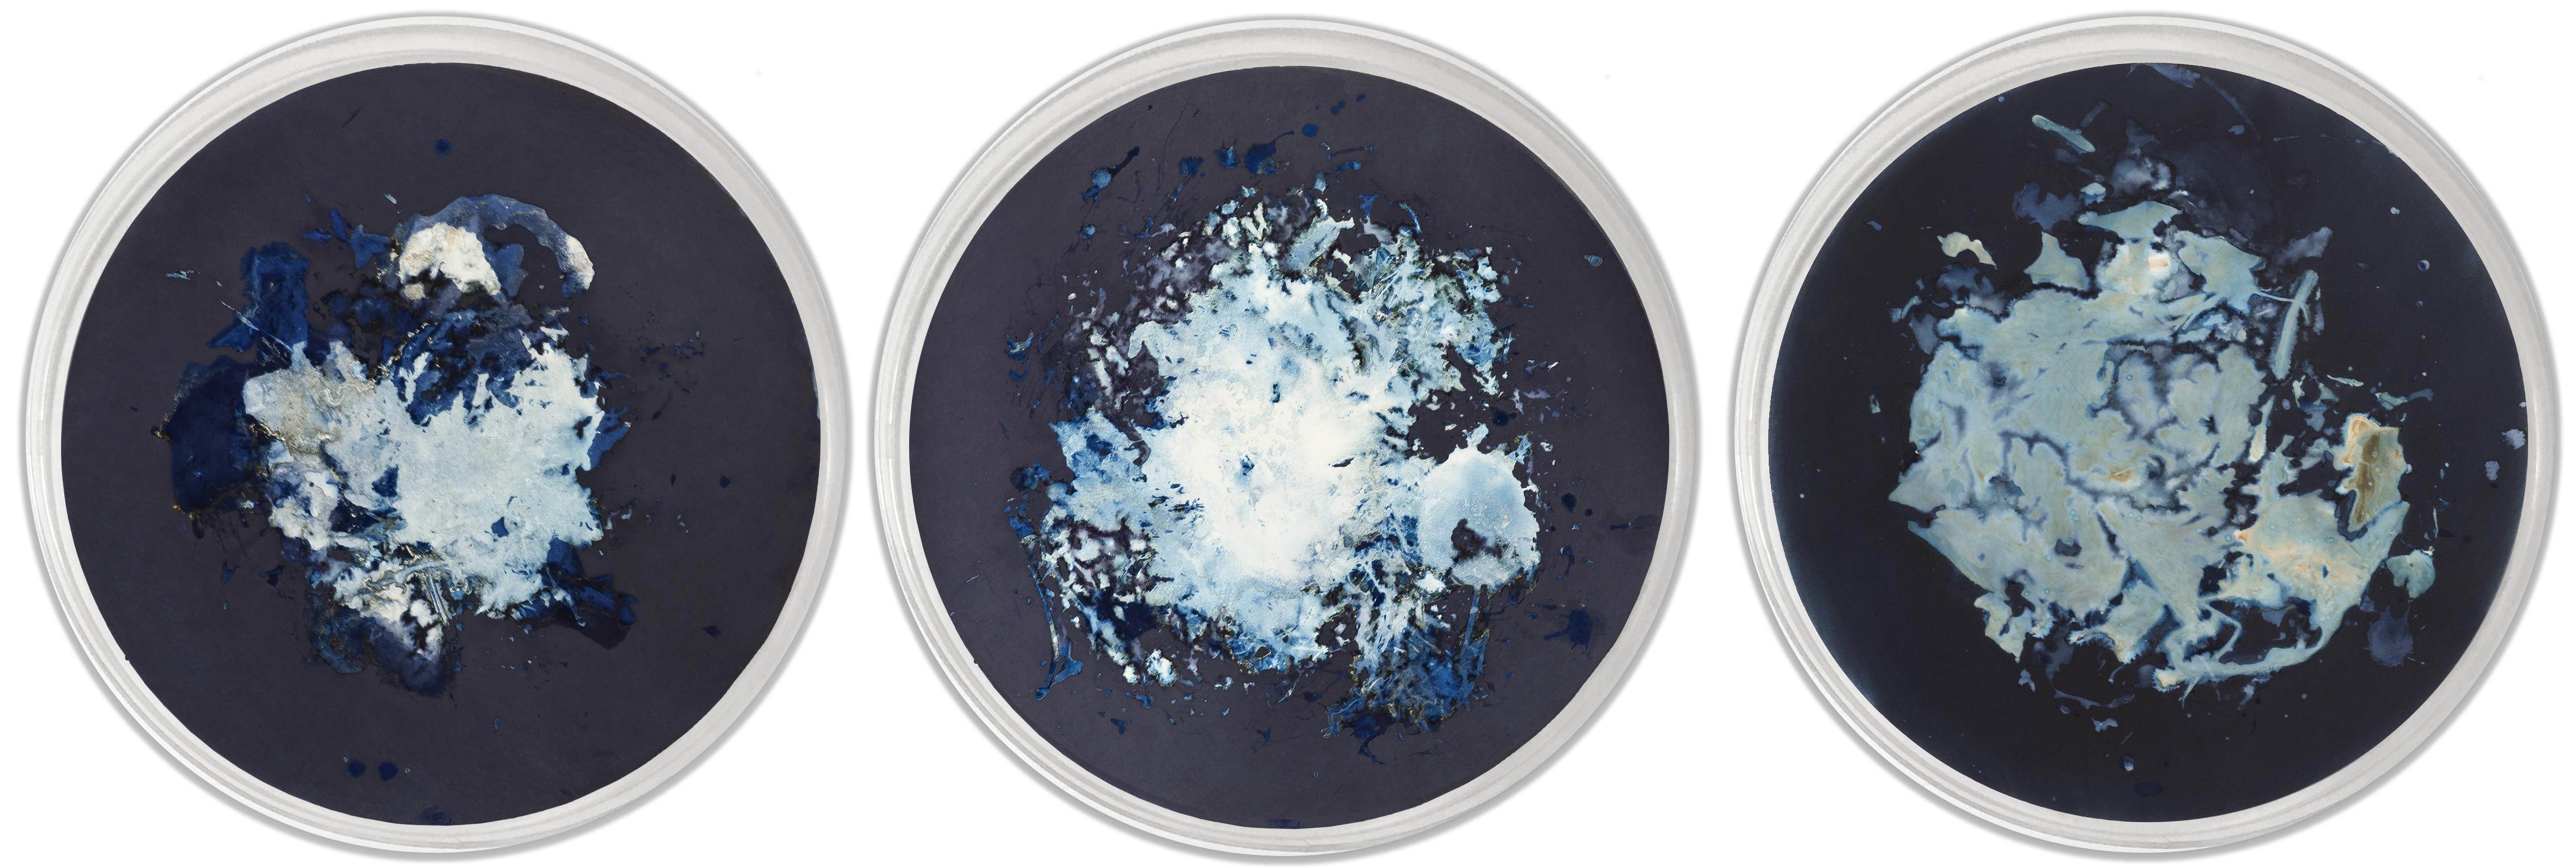 Algas 45-IV, V & XIX Triptych, 2022 by Paola Davila 
From the series Mareas
Cyanotype on 300 gr cotton paper
The piece is mounted on a circular aluminum sheet, on a 47 cm diameter transparent acrylic cap.
Overall size Mounted: 47 H x 141 W x 2.4